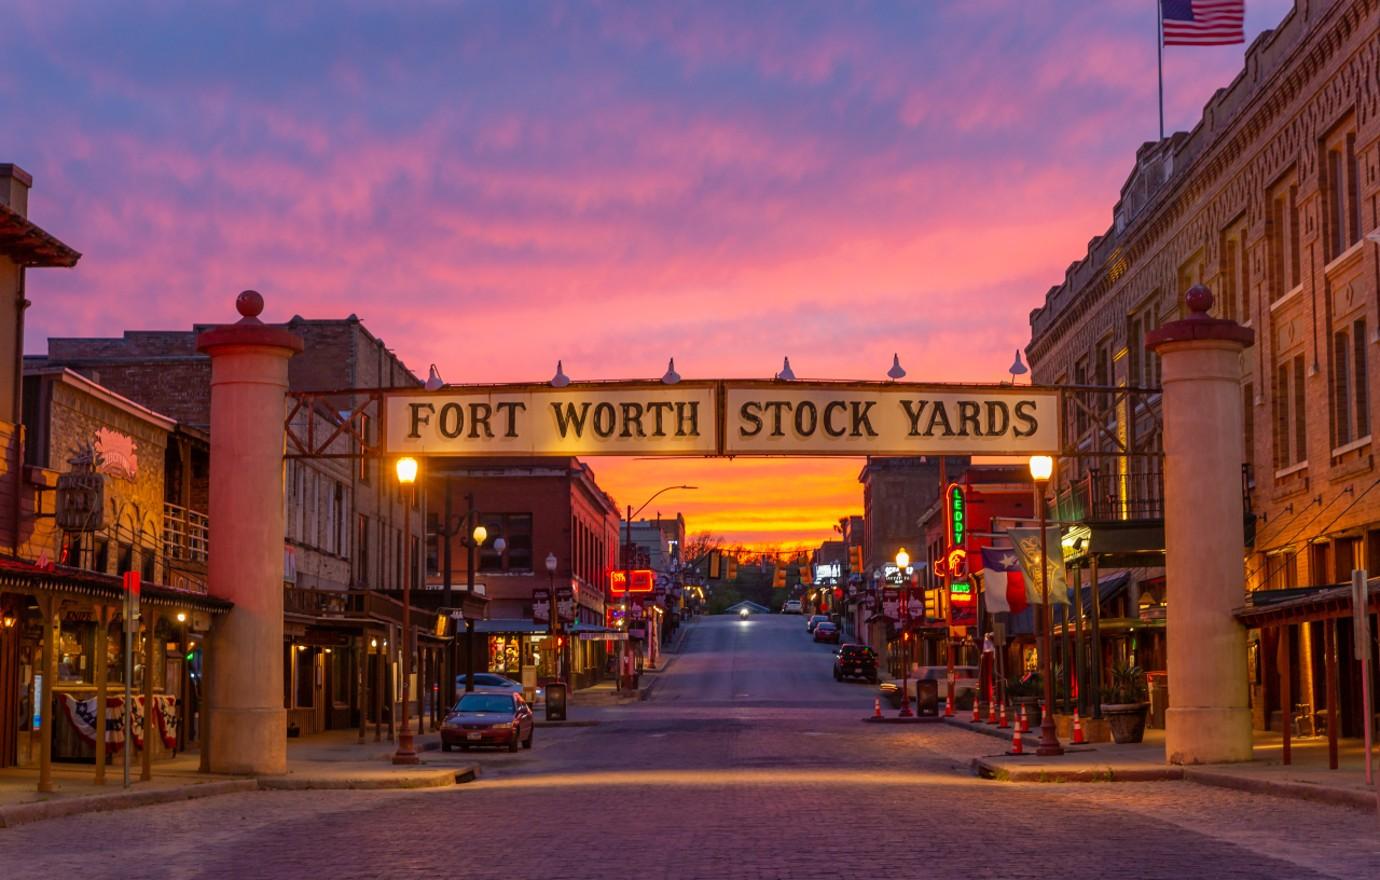 Historic building in Fort Worth Stockyards damaged in fire